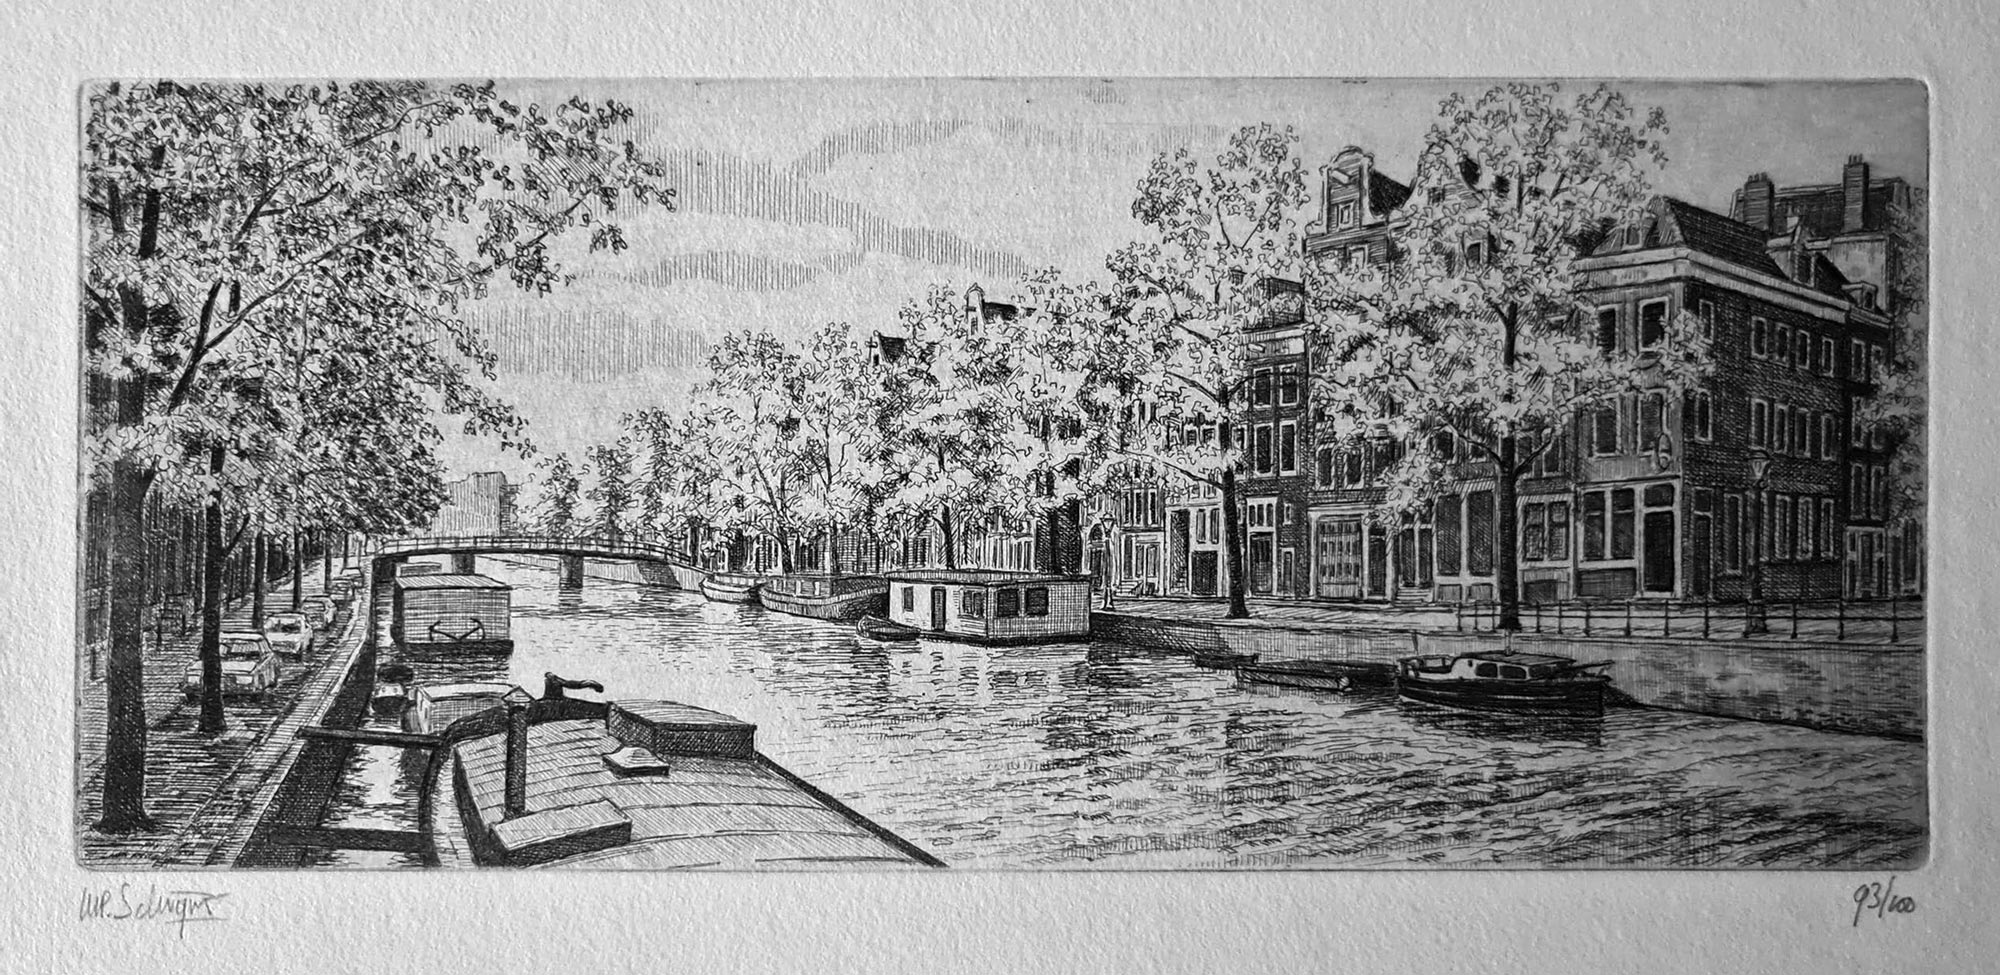 Featured image for “Gracht Amsterdam 93/100”